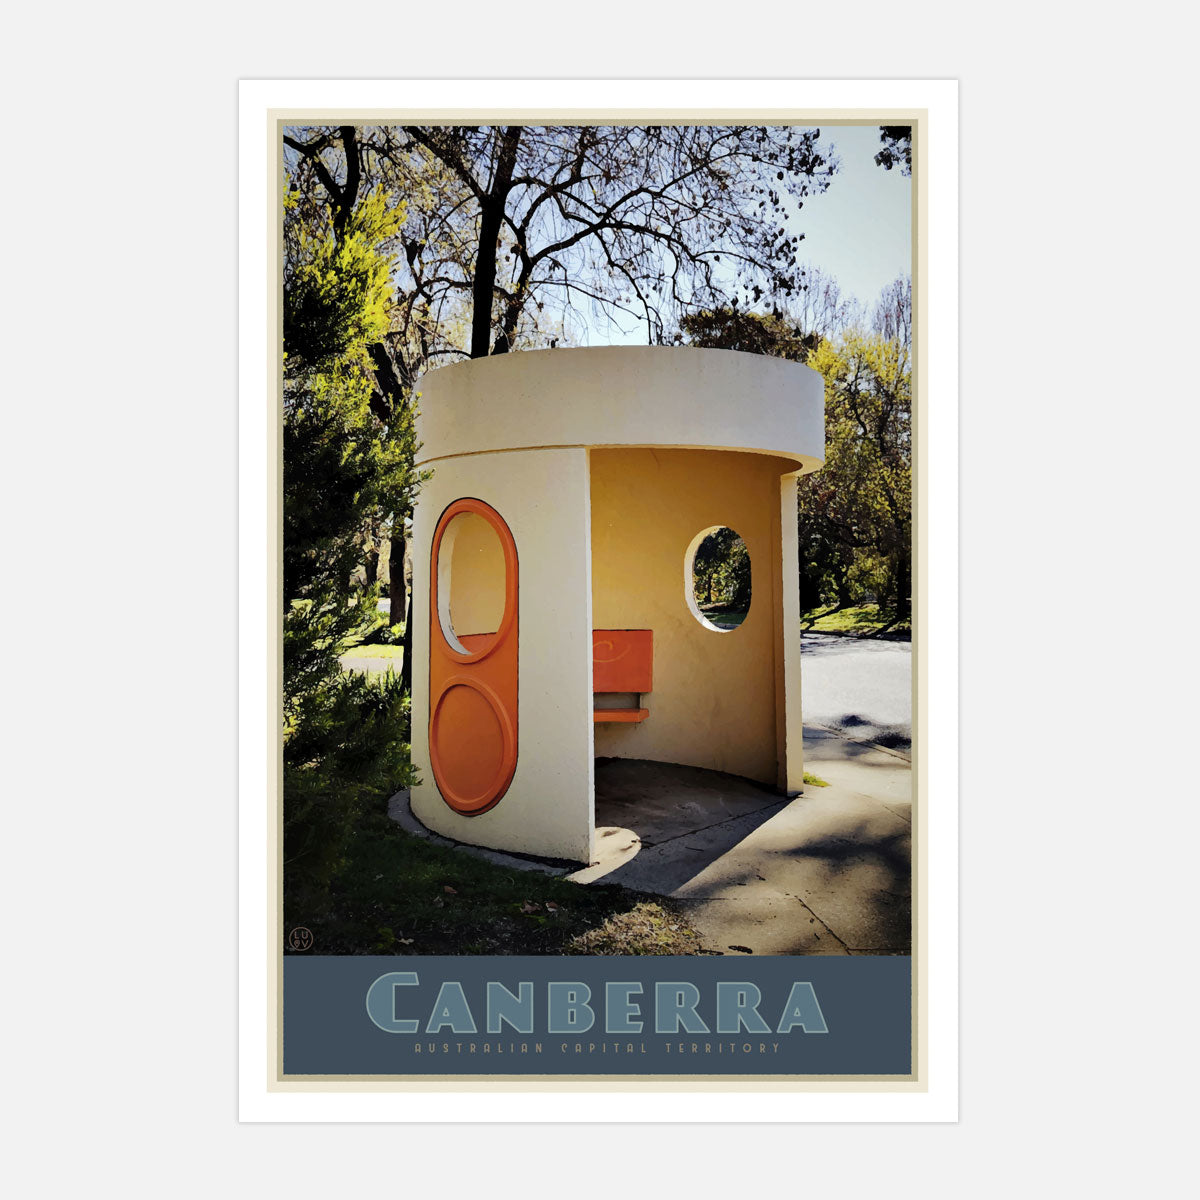 Canberra busstop vintage travel poster. Original design by Places we luv